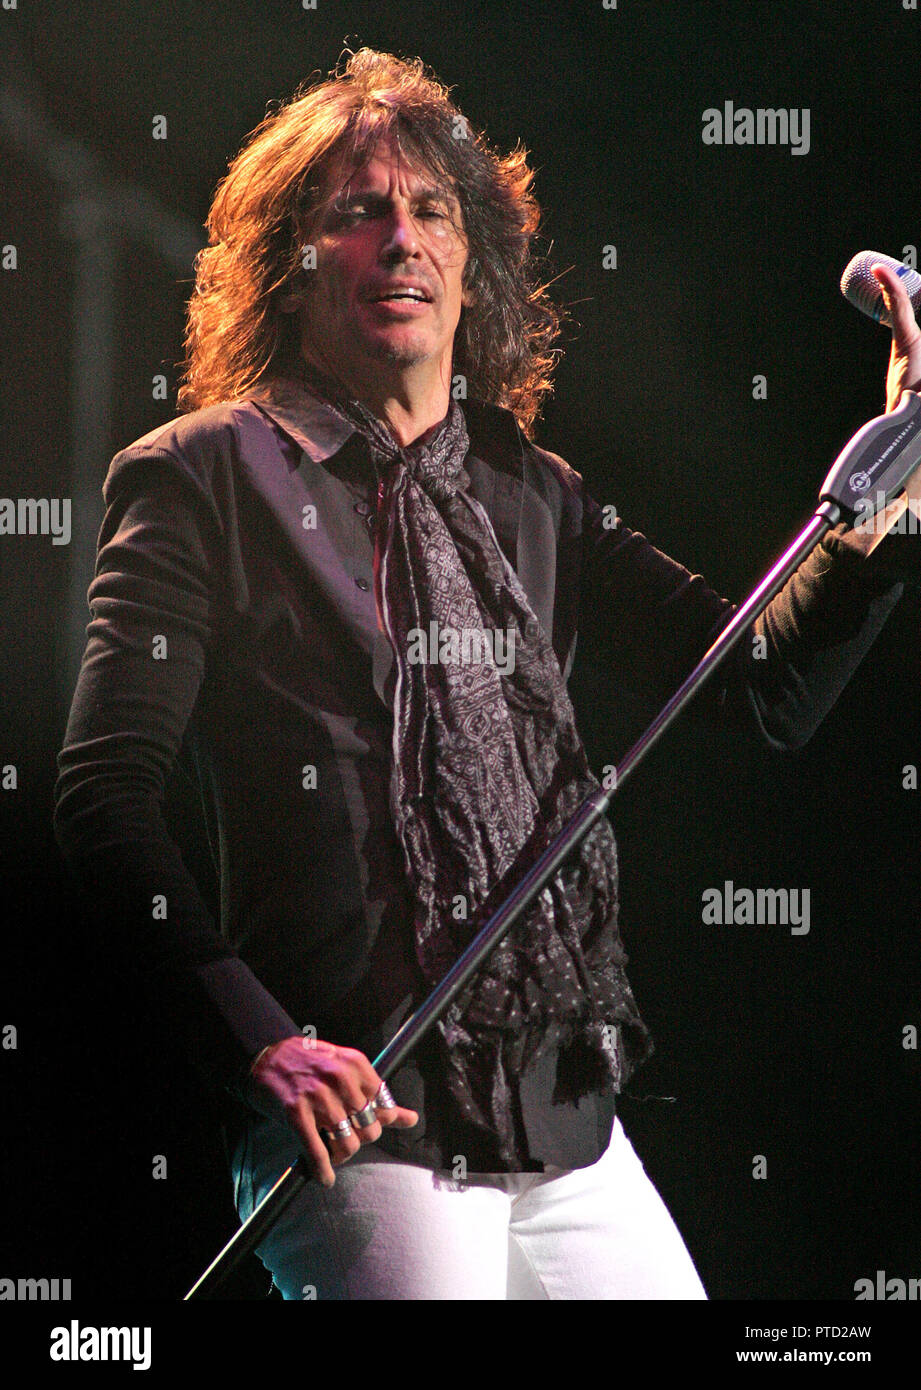 Kelly Hansen with Foreigner performs in concert at the Seminole Hard Rock Hotel and Casino in Hollywood, Florida on March 13, 2011. Stock Photo